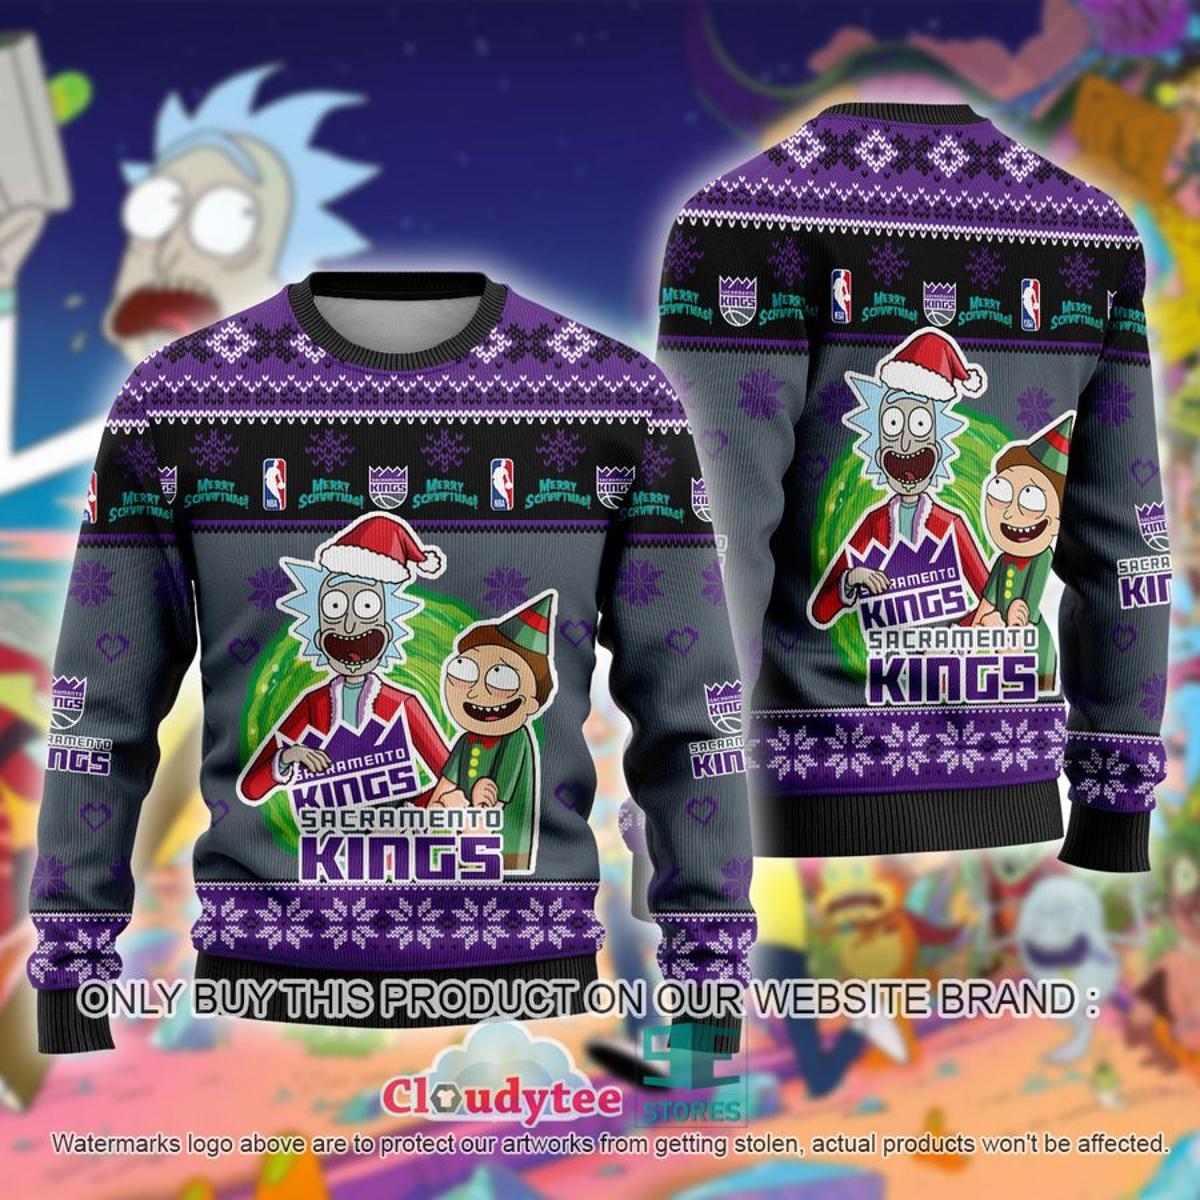 Sacramento Kings Purple Snoopy Ugly Christmas Sweater For Fans